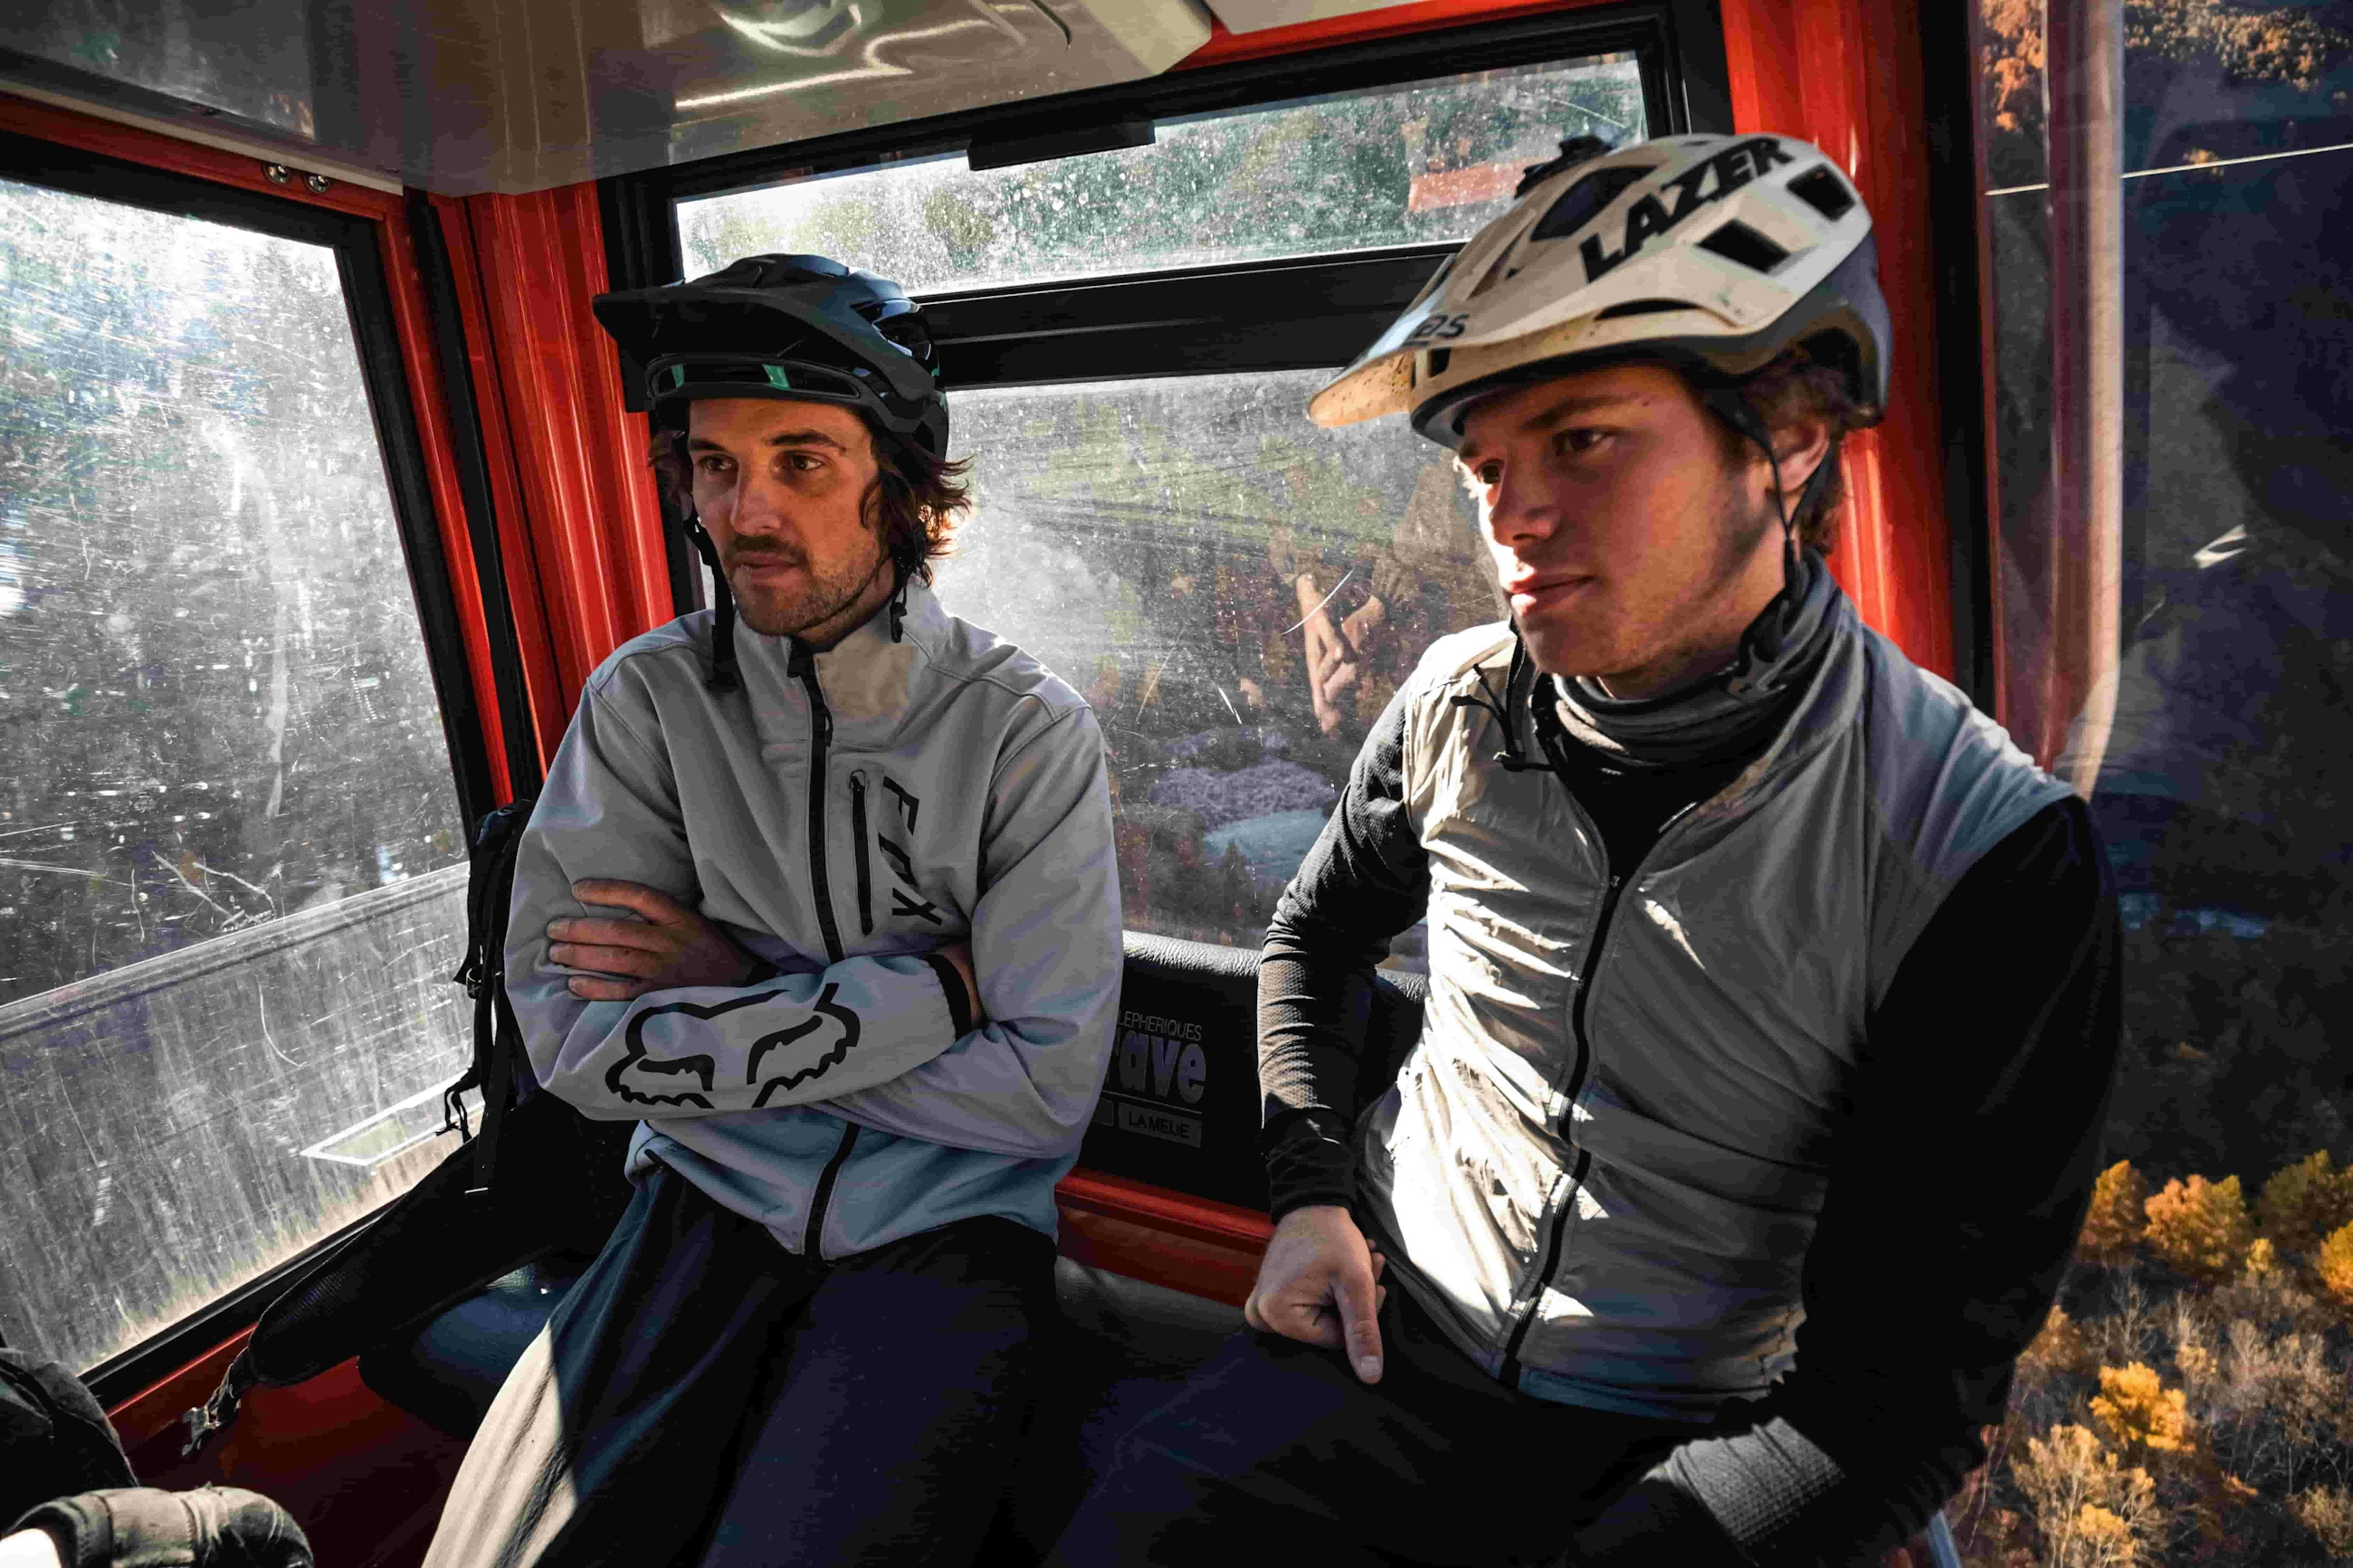 Loic D and another mountain biker riding in a gondola in La Grave